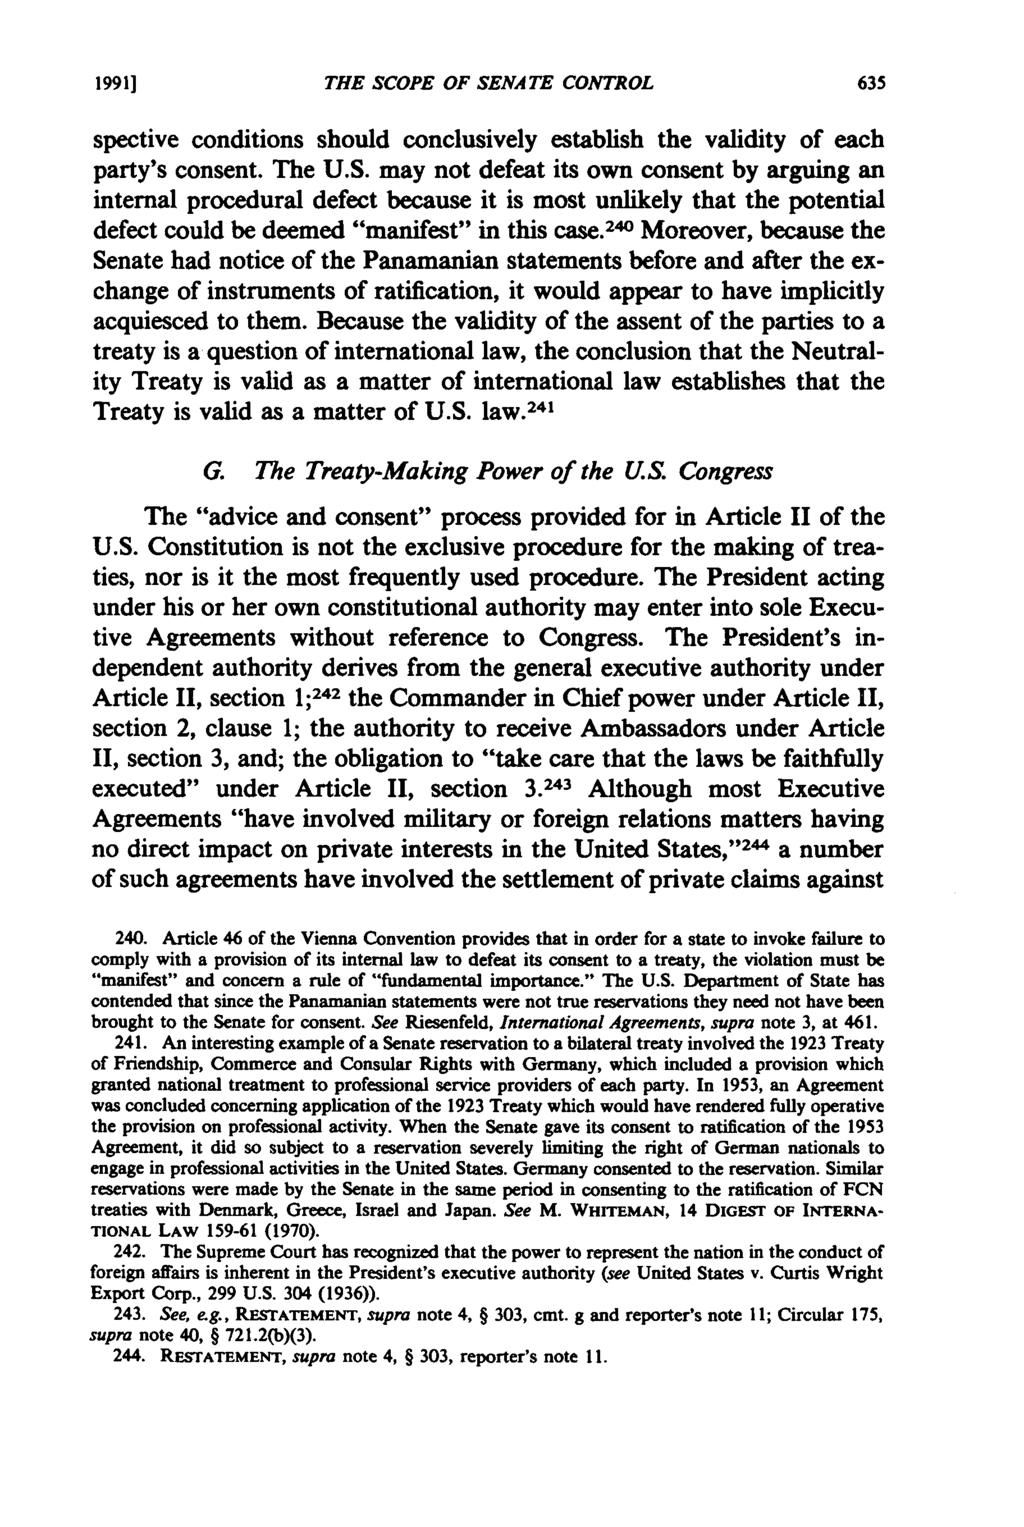 1991] THE SCOPE OF SENATE CONTROL spective conditions should conclusively establish the validity of each party's consent. The U.S. may not defeat its own consent by arguing an internal procedural defect because it is most unlikely that the potential defect could be deemed "manifest" in this case.